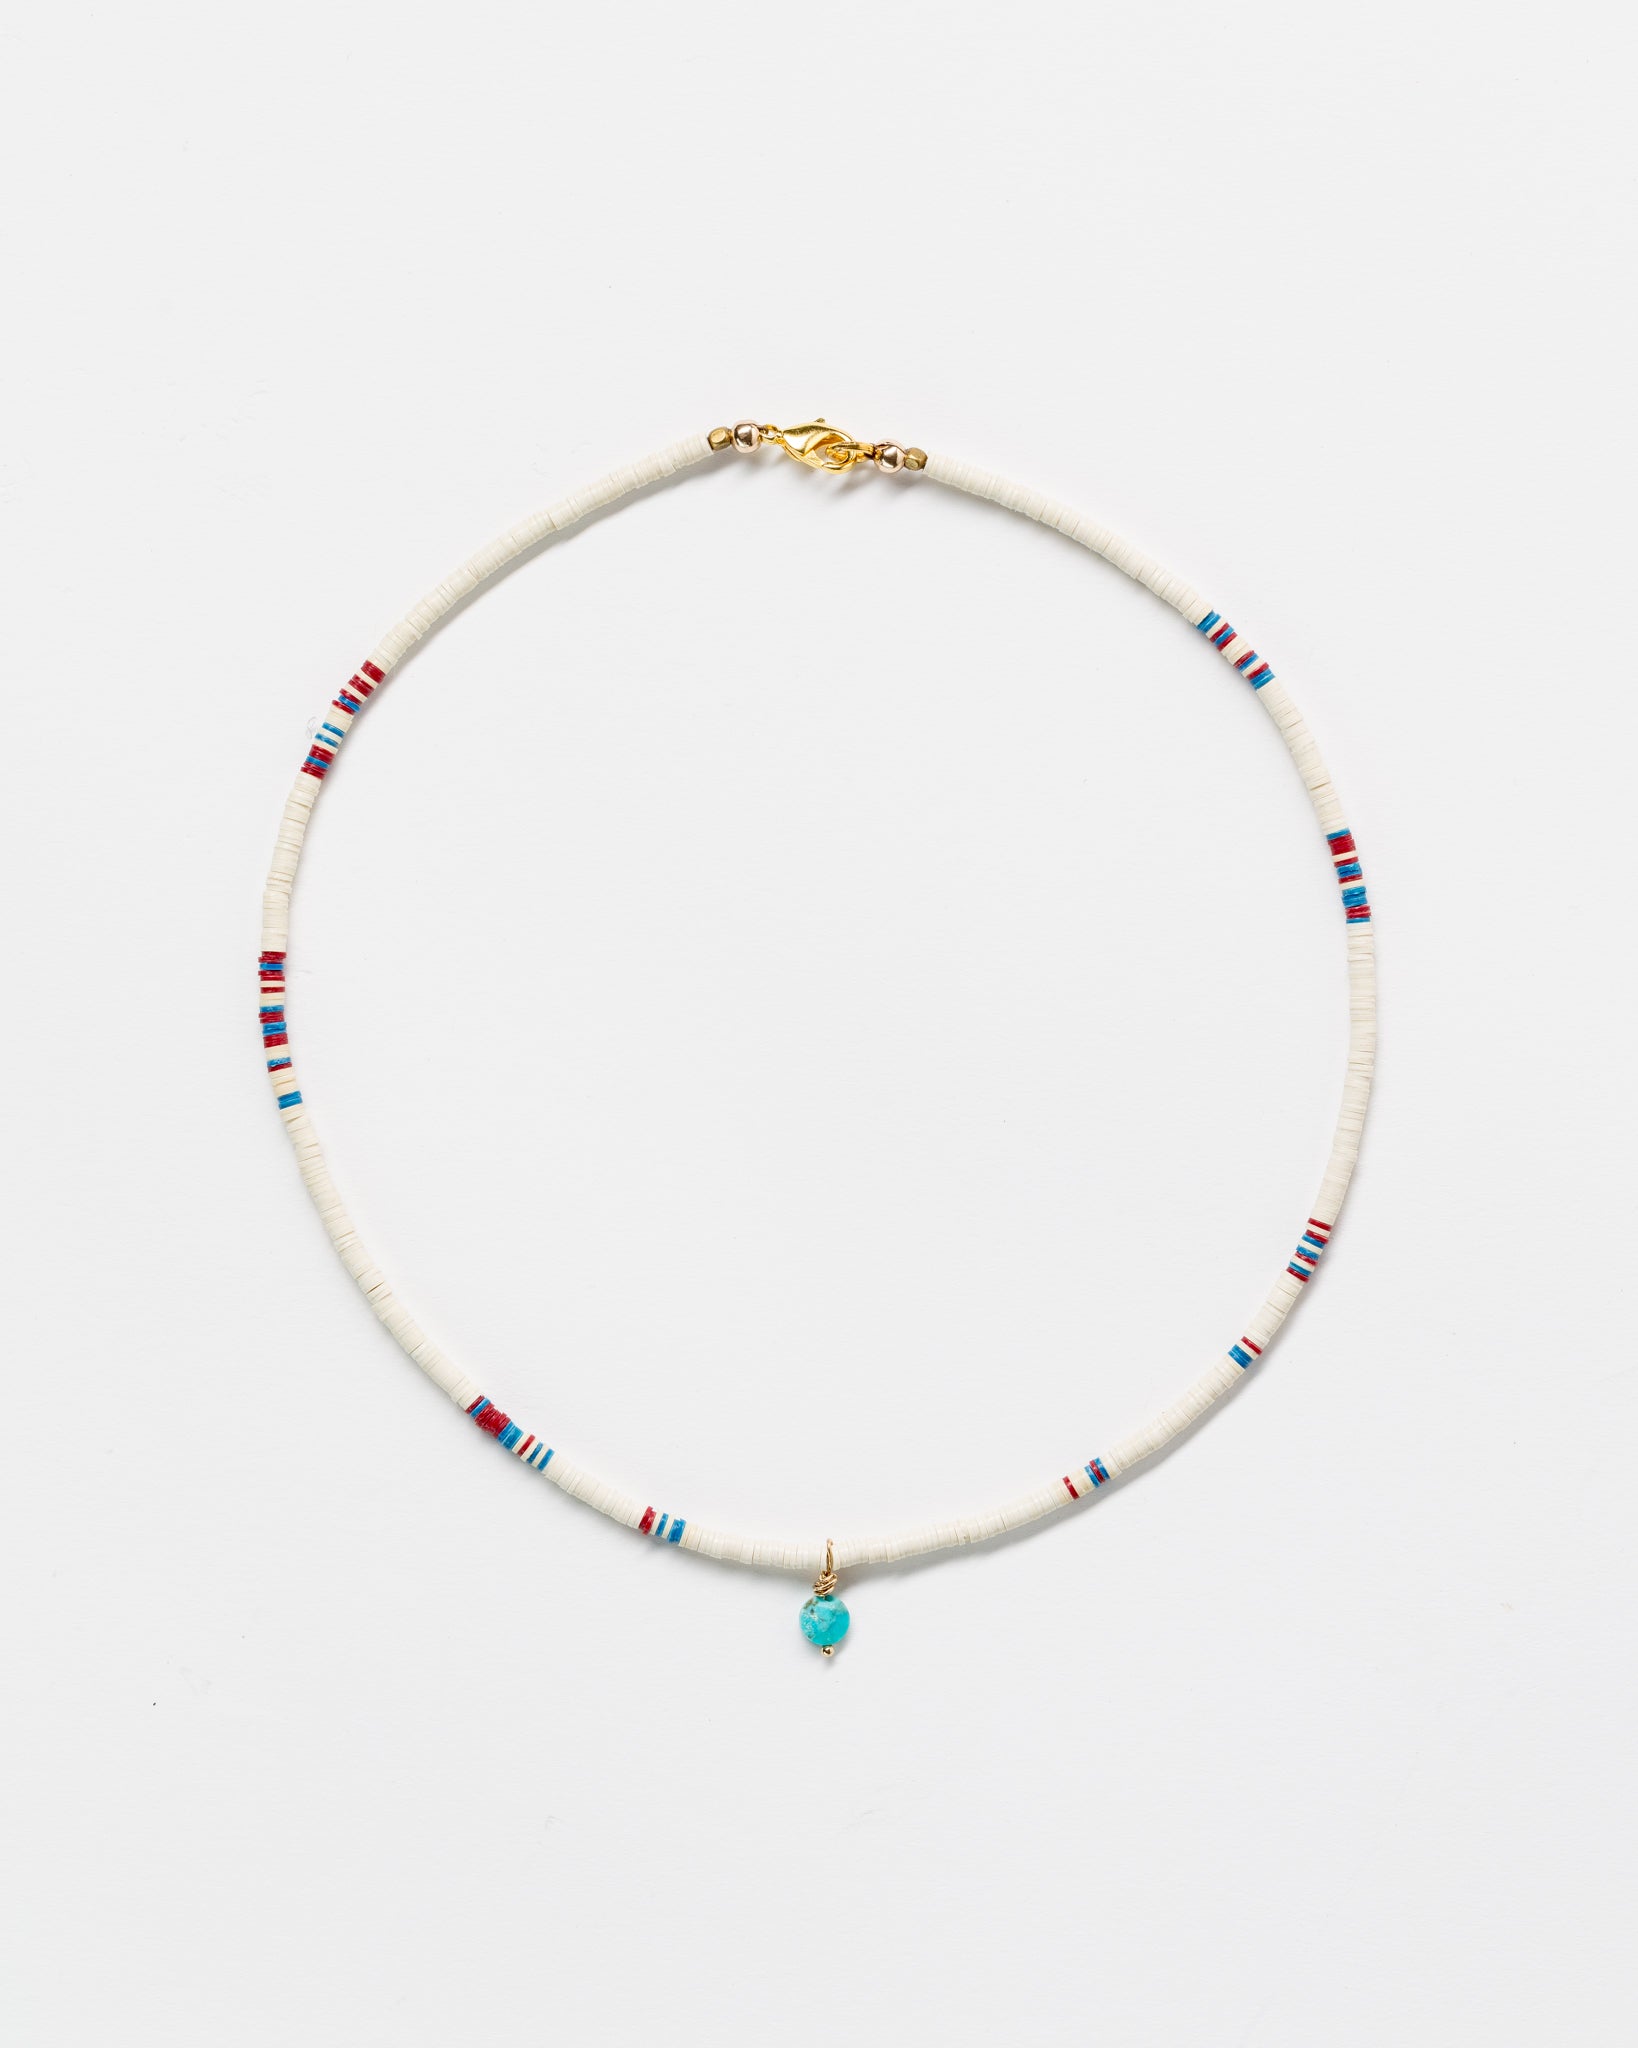 A delicate Designs By Raya choker necklace with small white beads, accented with sparse multicolored beads and an Arizona turquoise pendant, displayed against a plain white background.